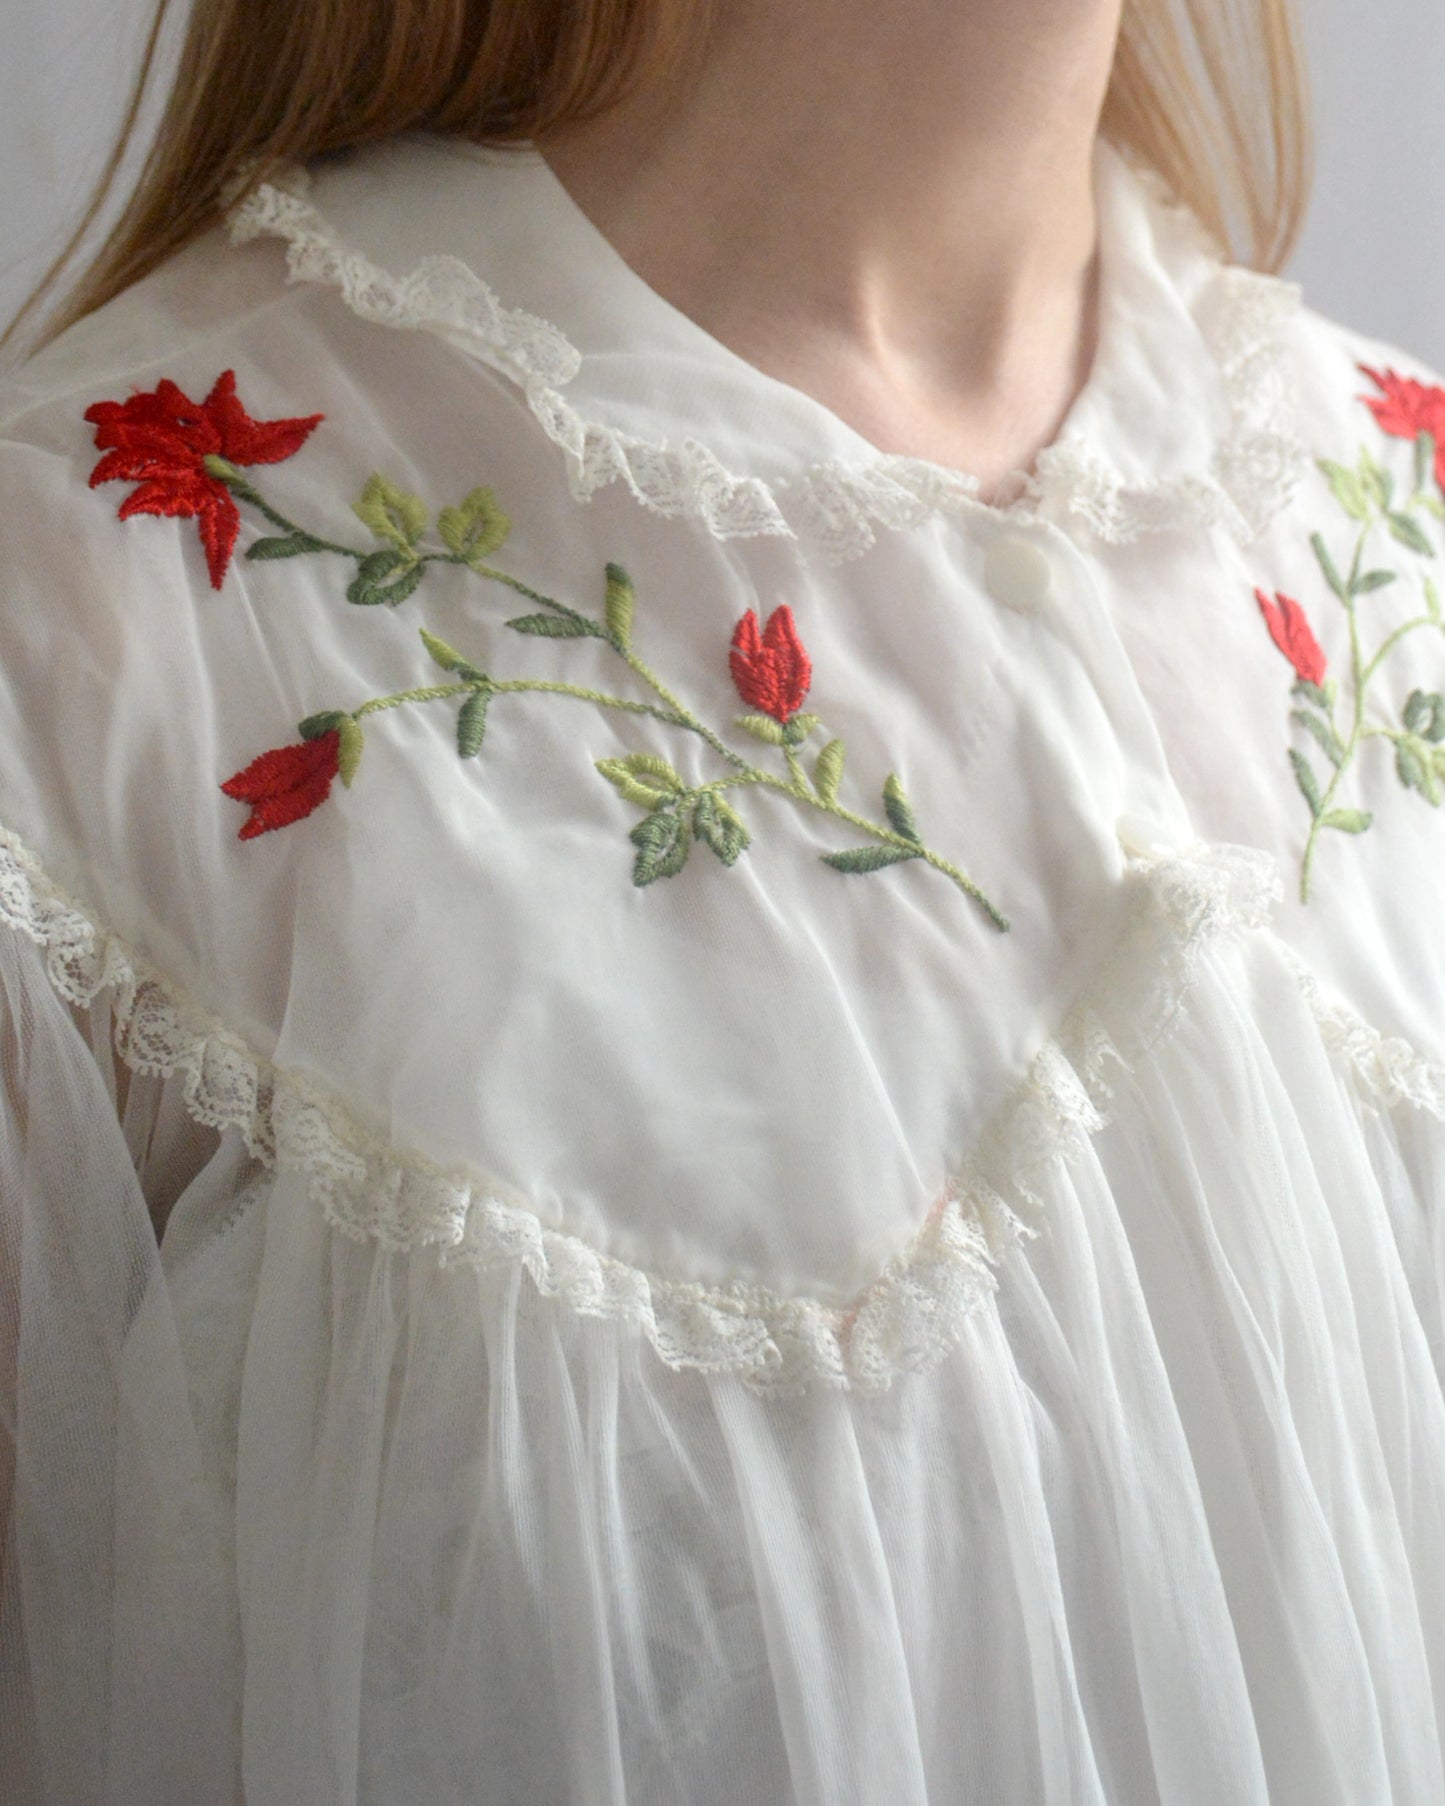 VINTAGE 1950s PEIGNOIR WITH ROSE EMBROIDERY